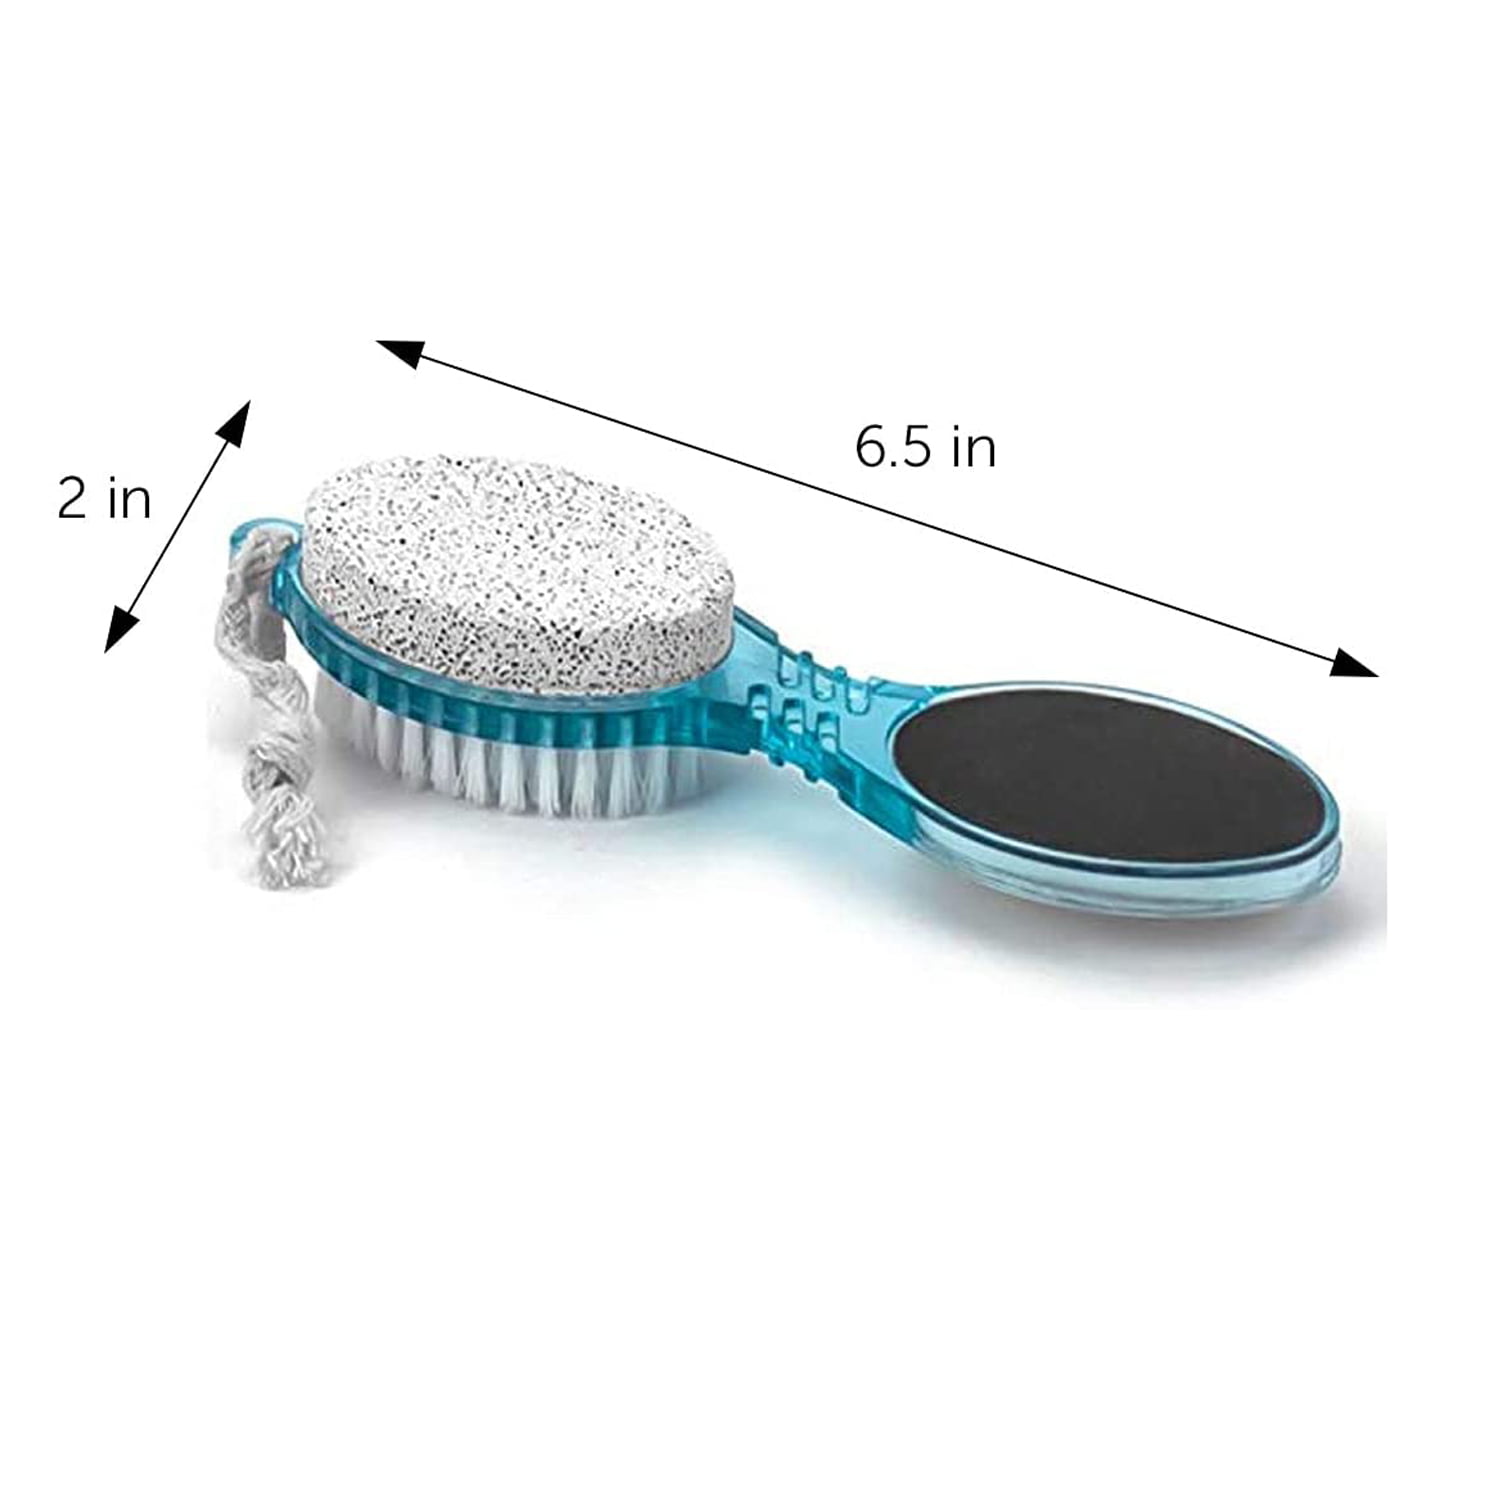  Denco Easy Grip Heavy Duty Foot Smoother, Professional  Pedicure Tool, 1 Count : Pumice Stone For Feet : Health & Household